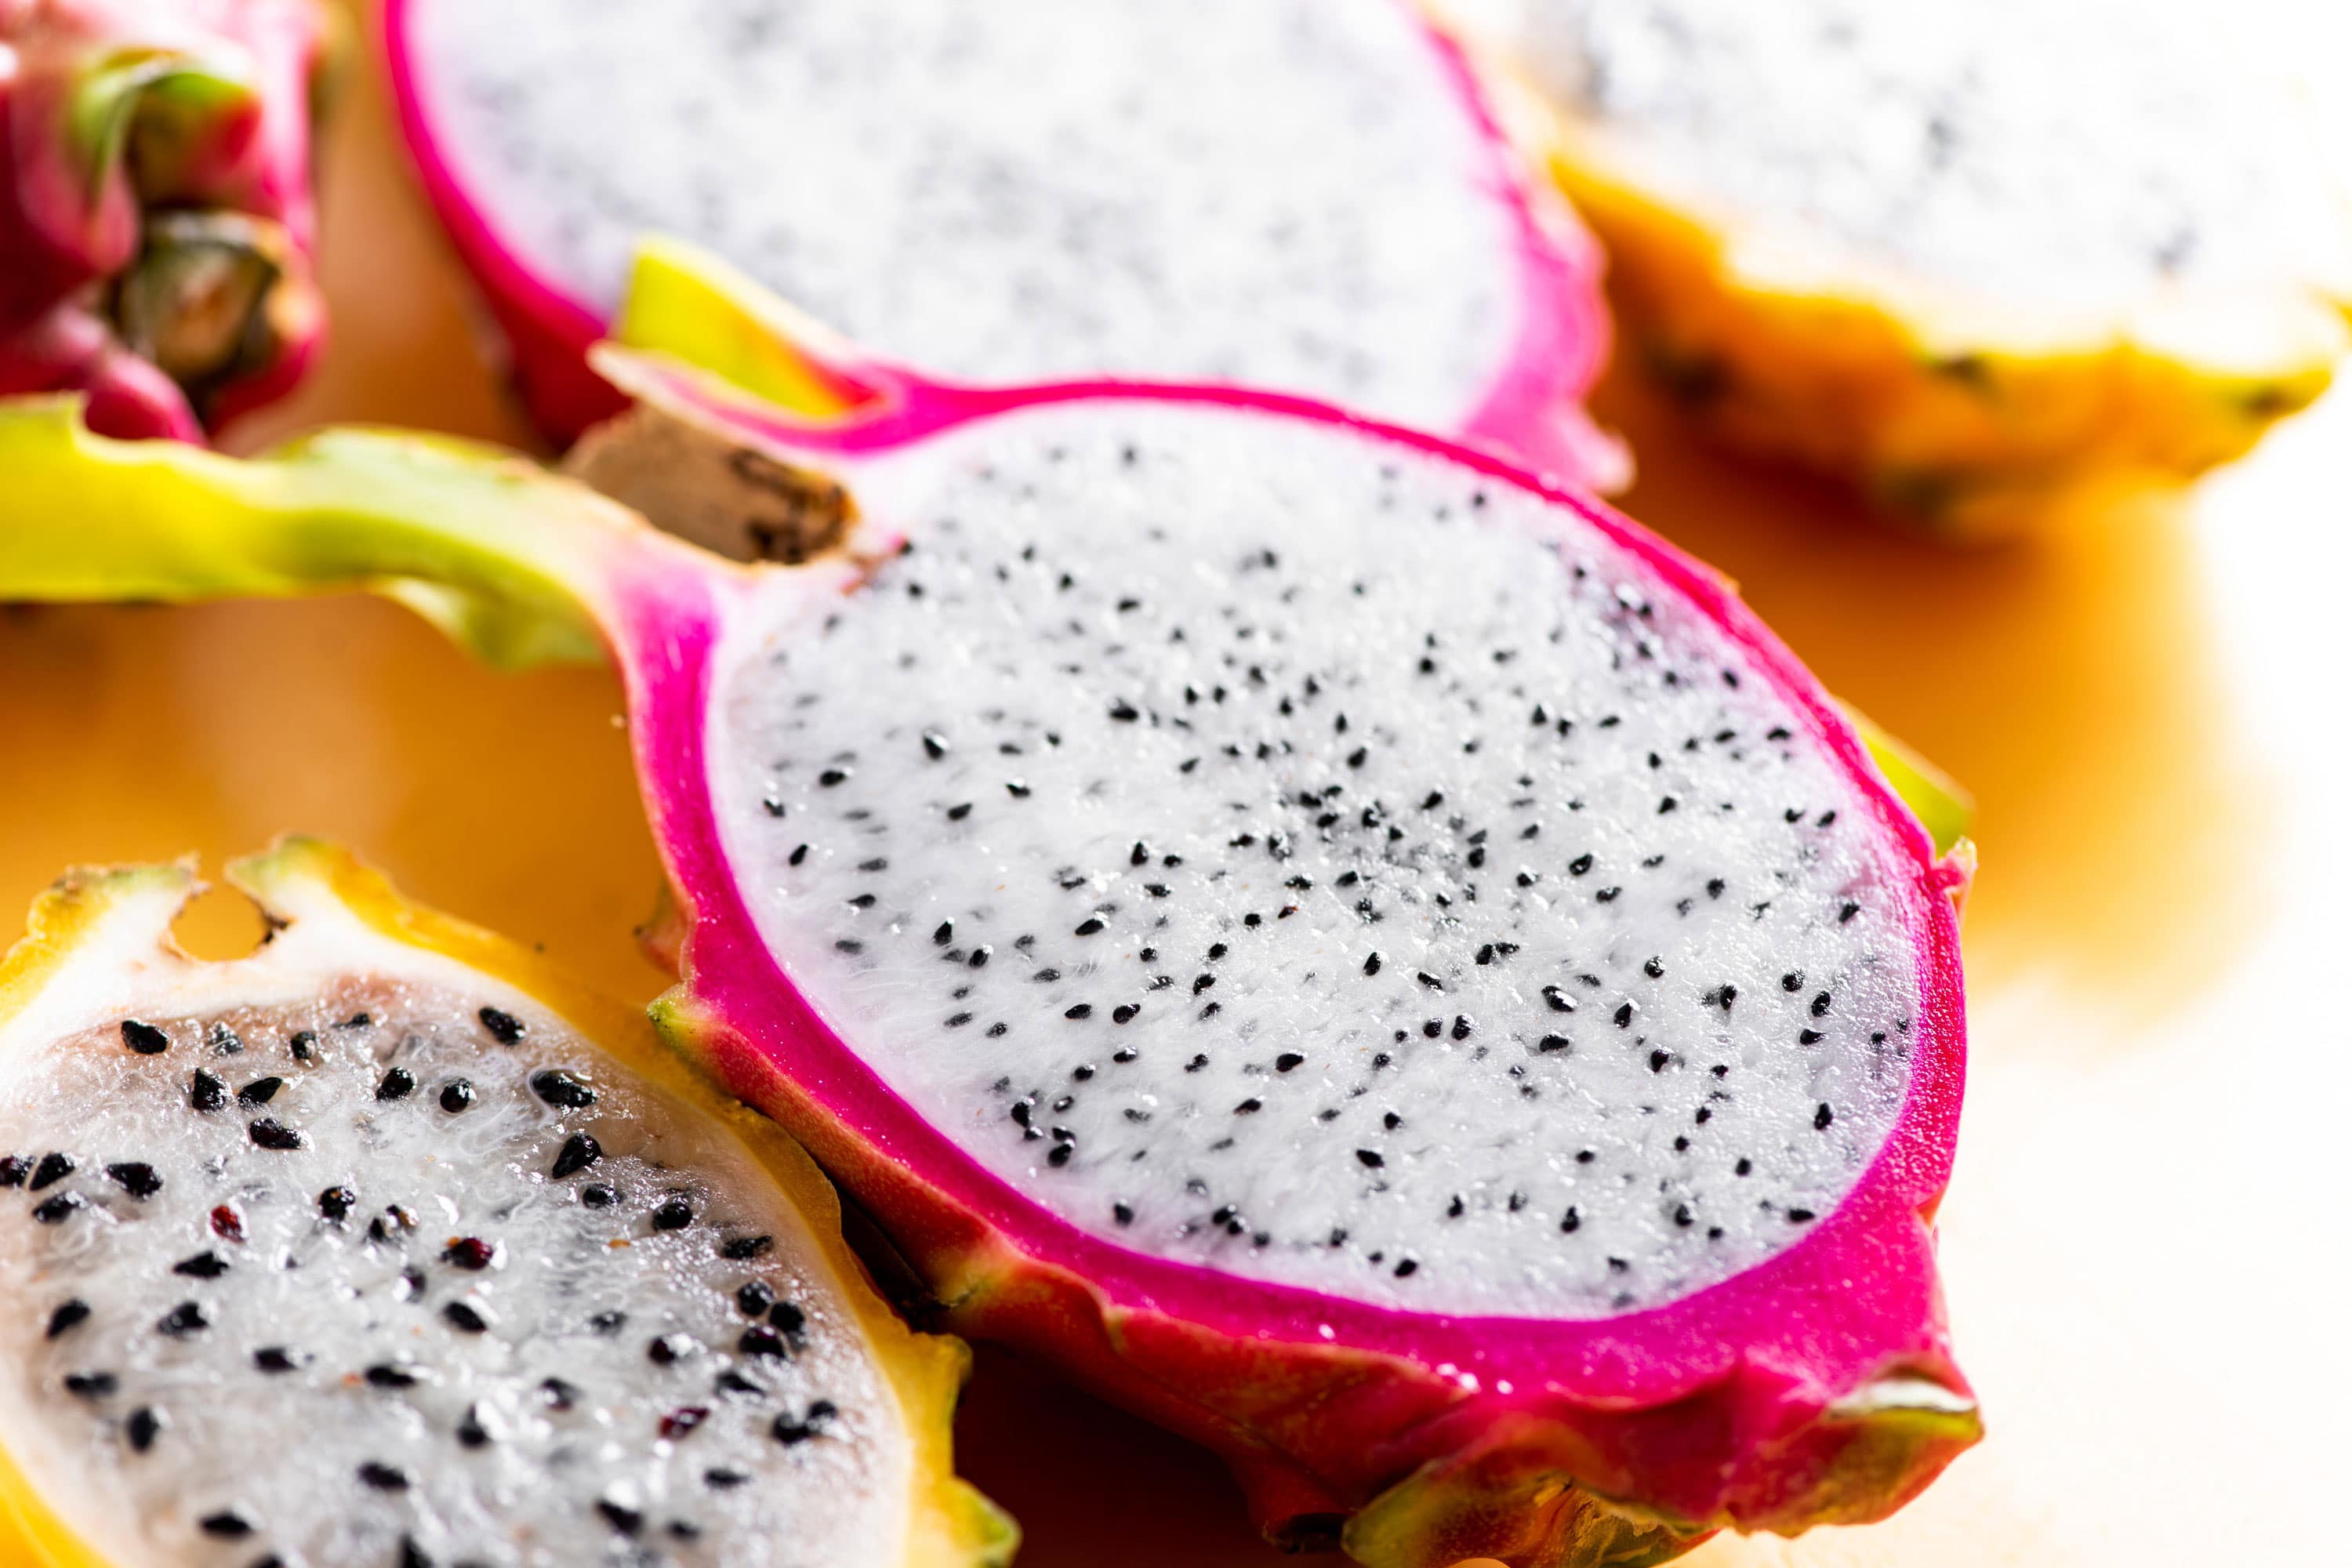 How To Prepare And Eat Dragon Fruit The Mom 100,Wedding Recessional Songs 2020